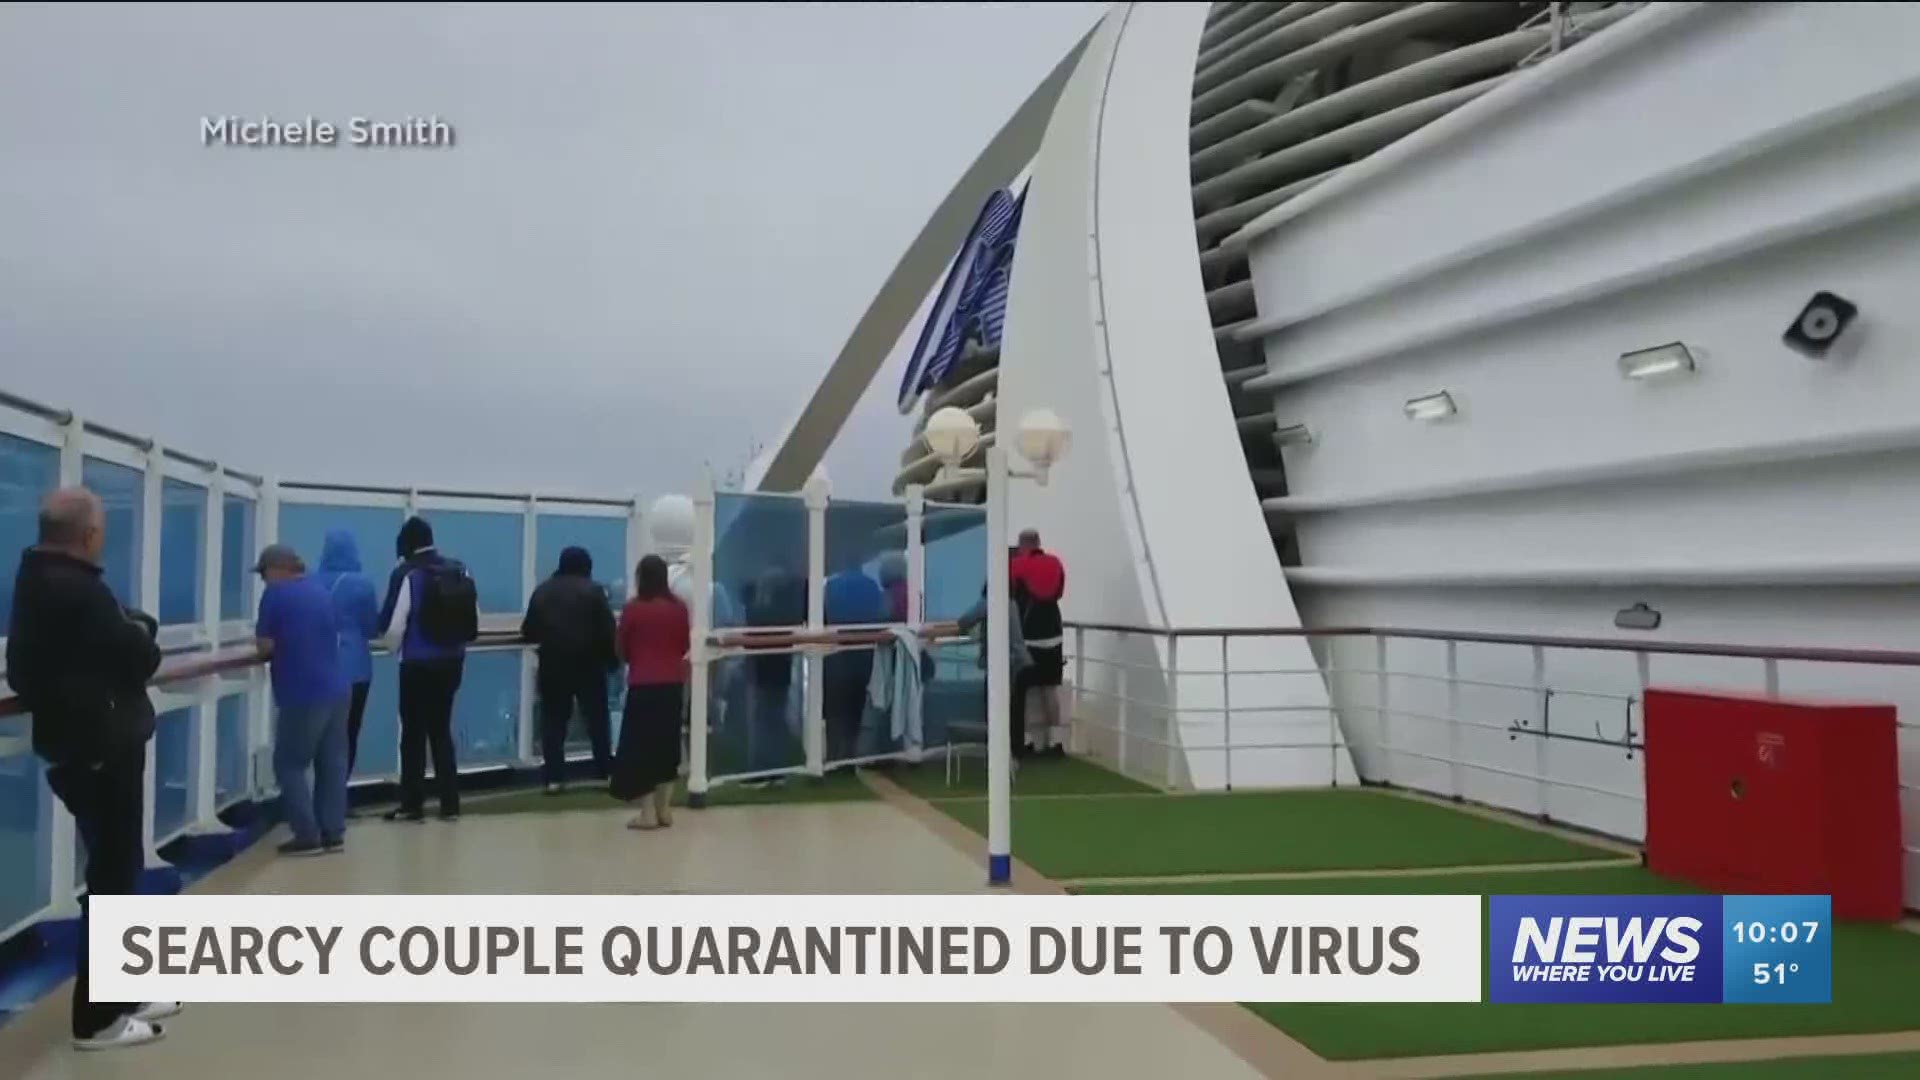 Searcy couple quarantined due to virus